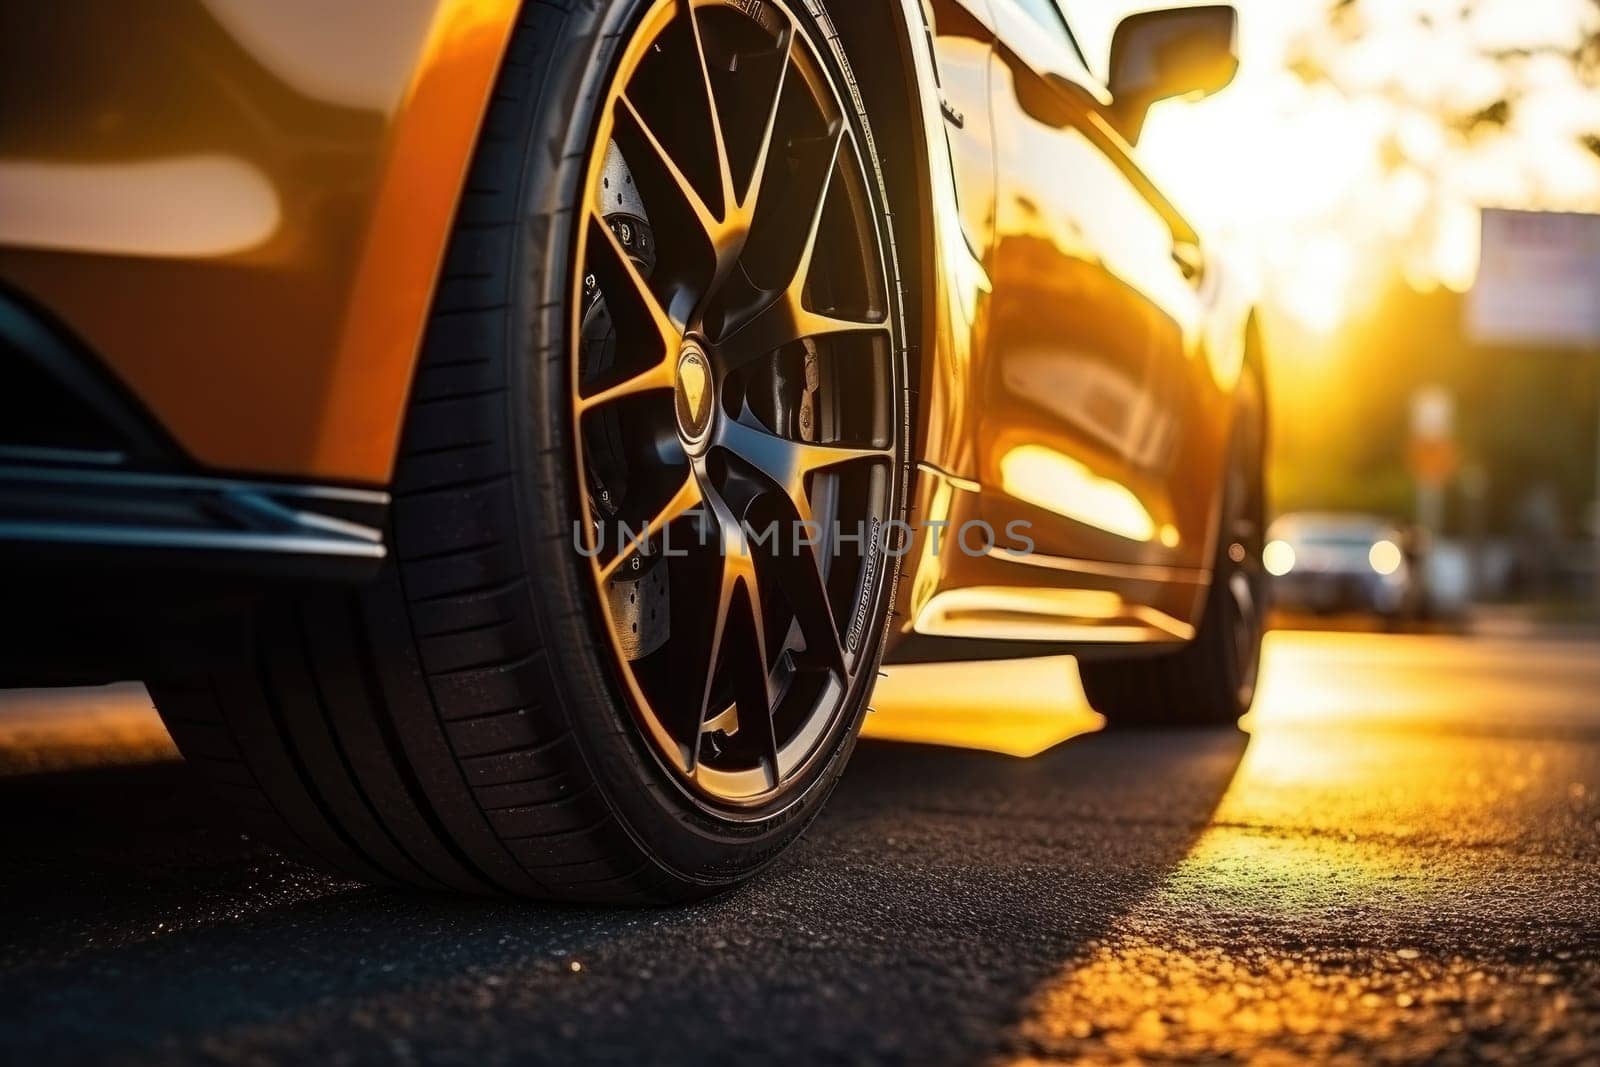 close up sport car photography capturing motion blur, reflections, close up view of a car wheel